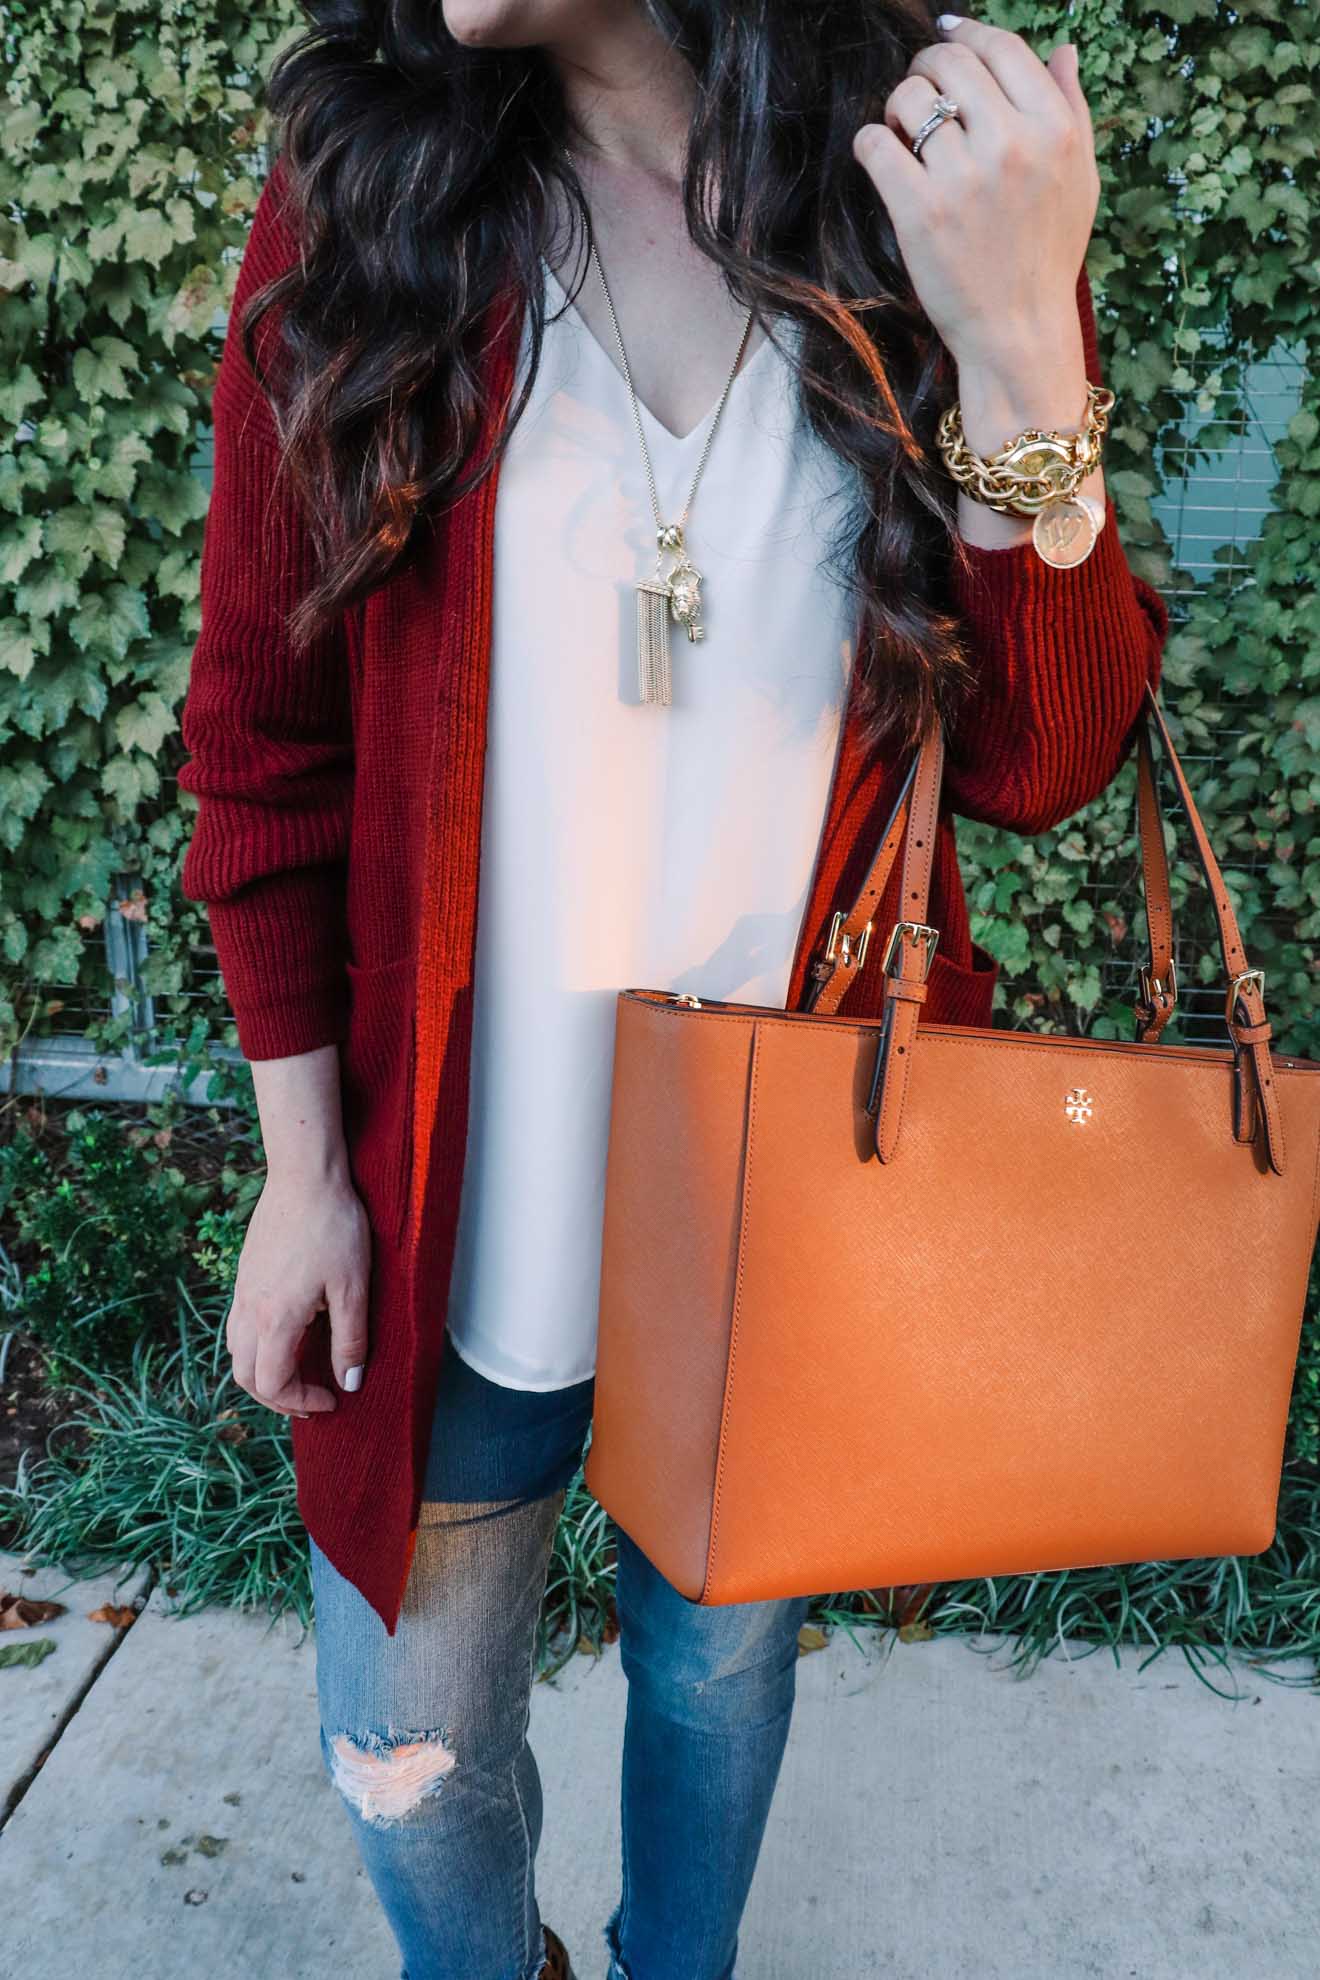 Perfect Affordable Fall Cardigans | Lately With Lindsay & Whitney - The ...